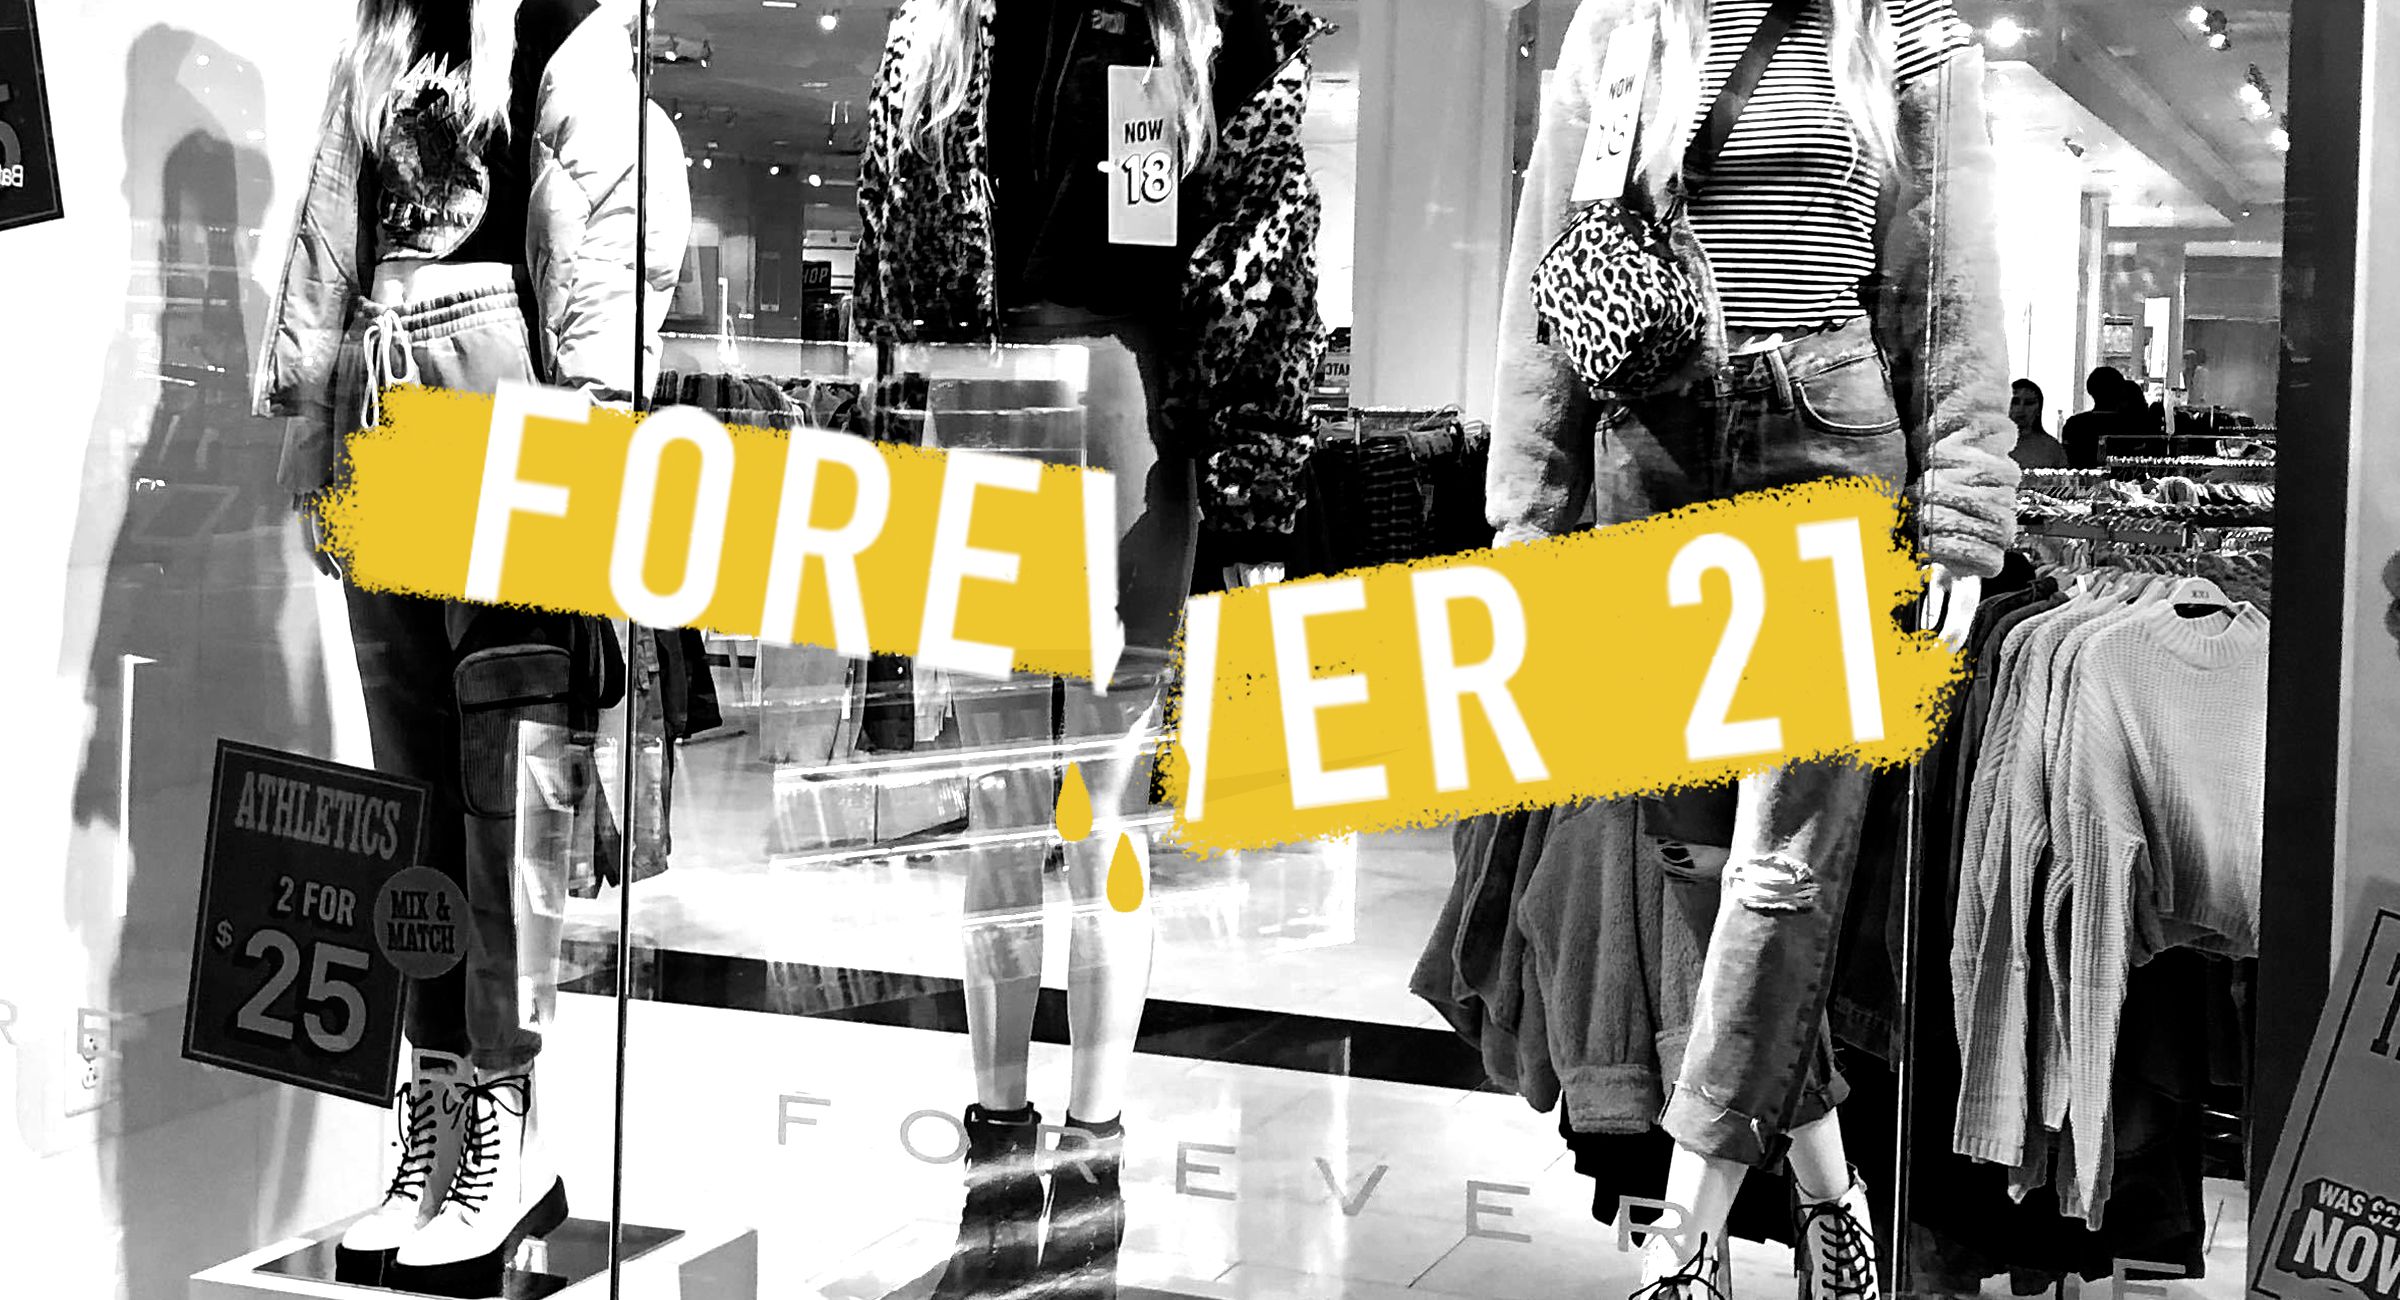 Five hours at Forever 21 in Woodbridge, Virginia - The Washington Post